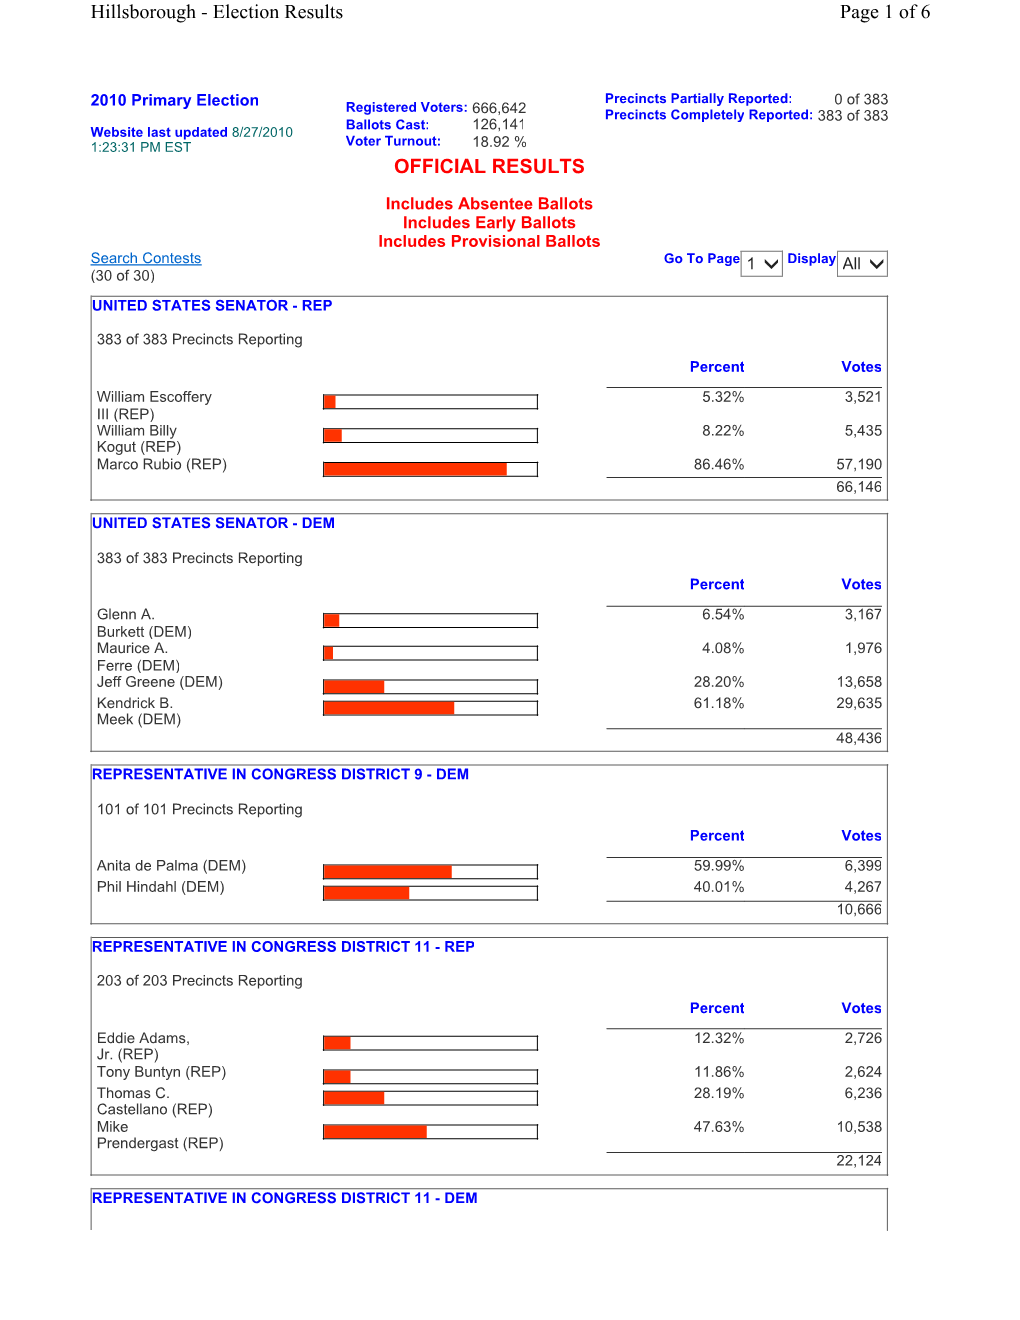 Election Results Page 1 of 6